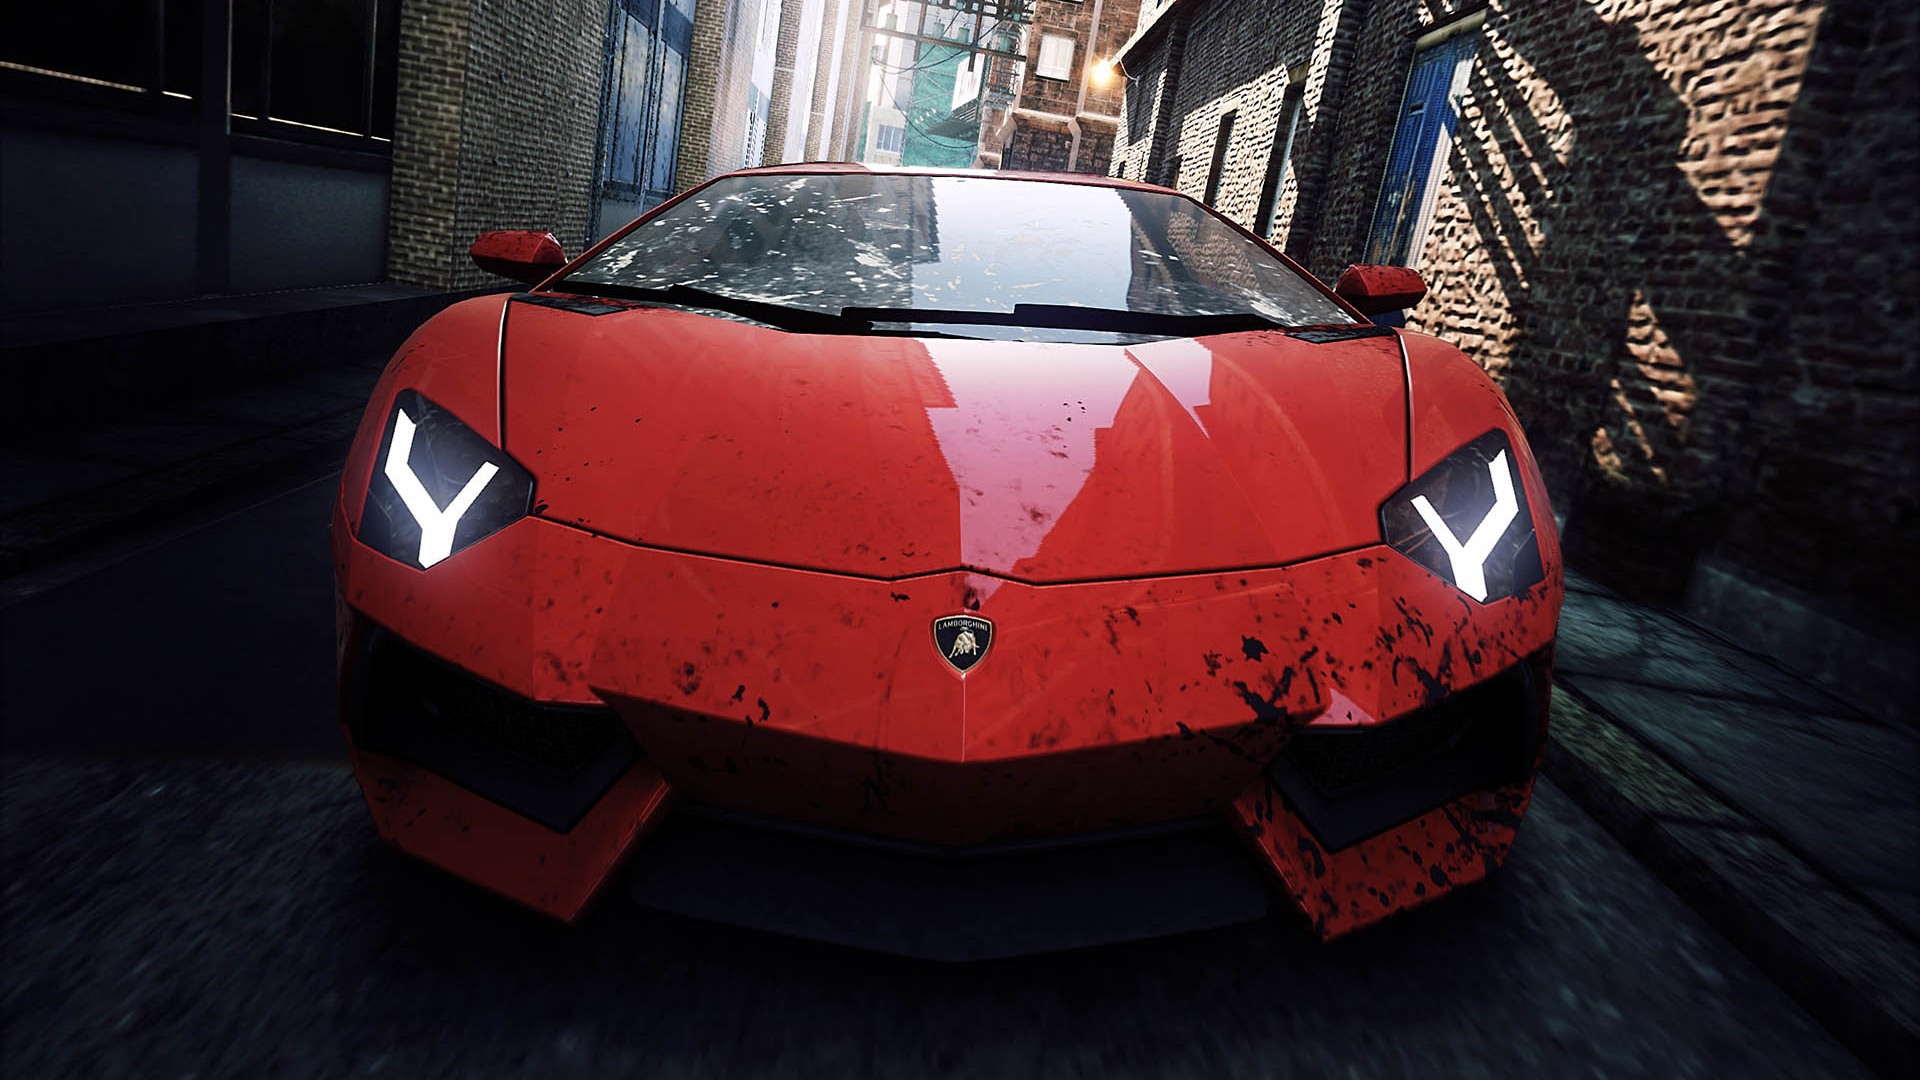 Need for Speed: Most Wanted 极品飞车17：最高通缉 高清壁纸10 - 1920x1080